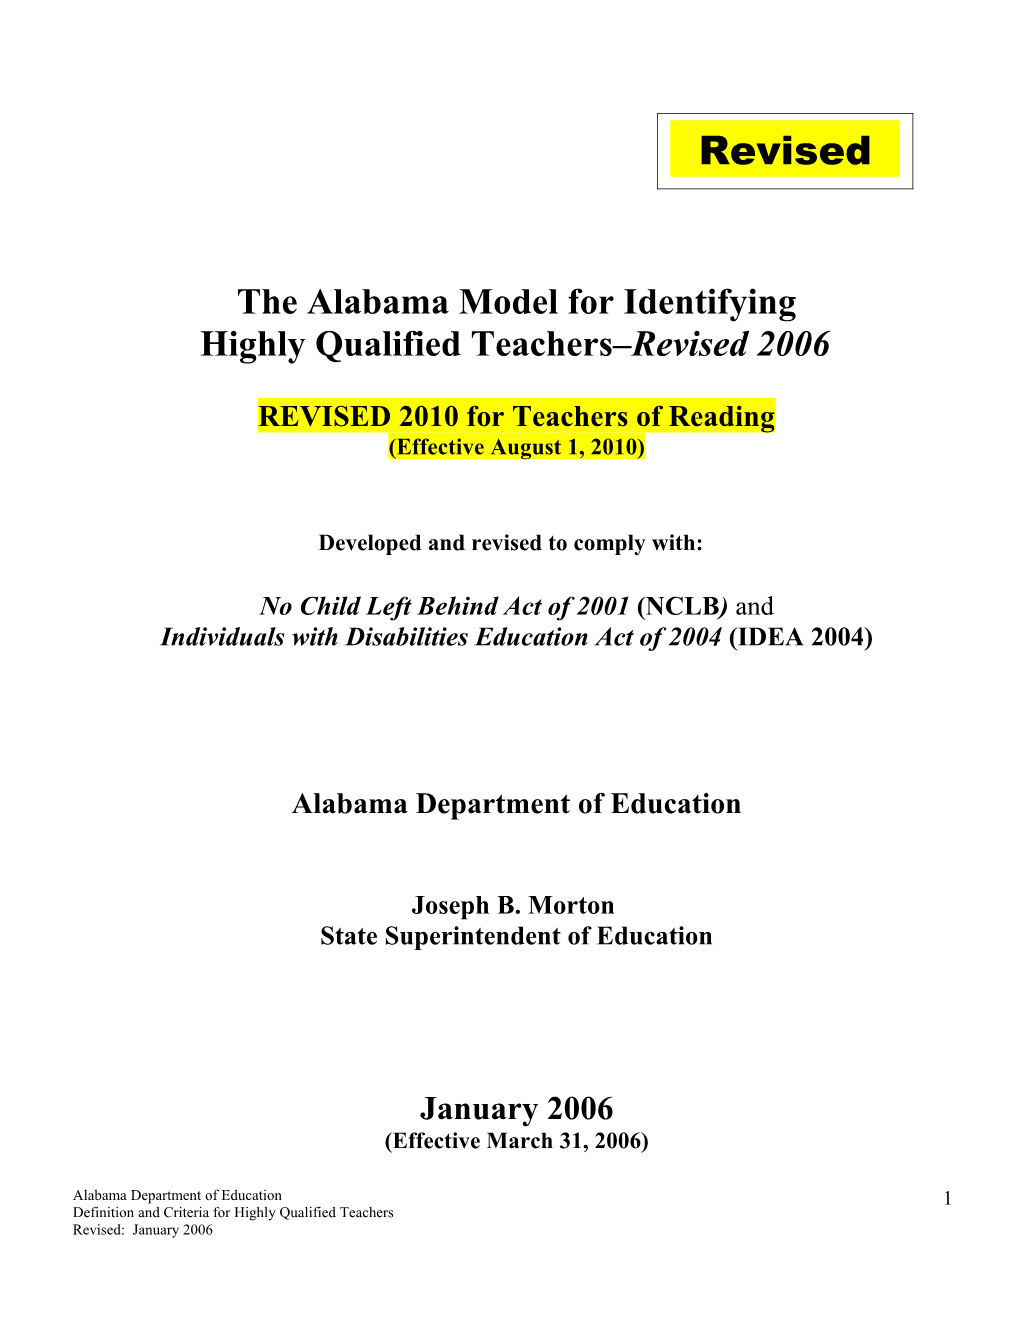 Proposed Guide for Determining Whether Or Not a Teacher Is Highly-Qualified Based on Criteria